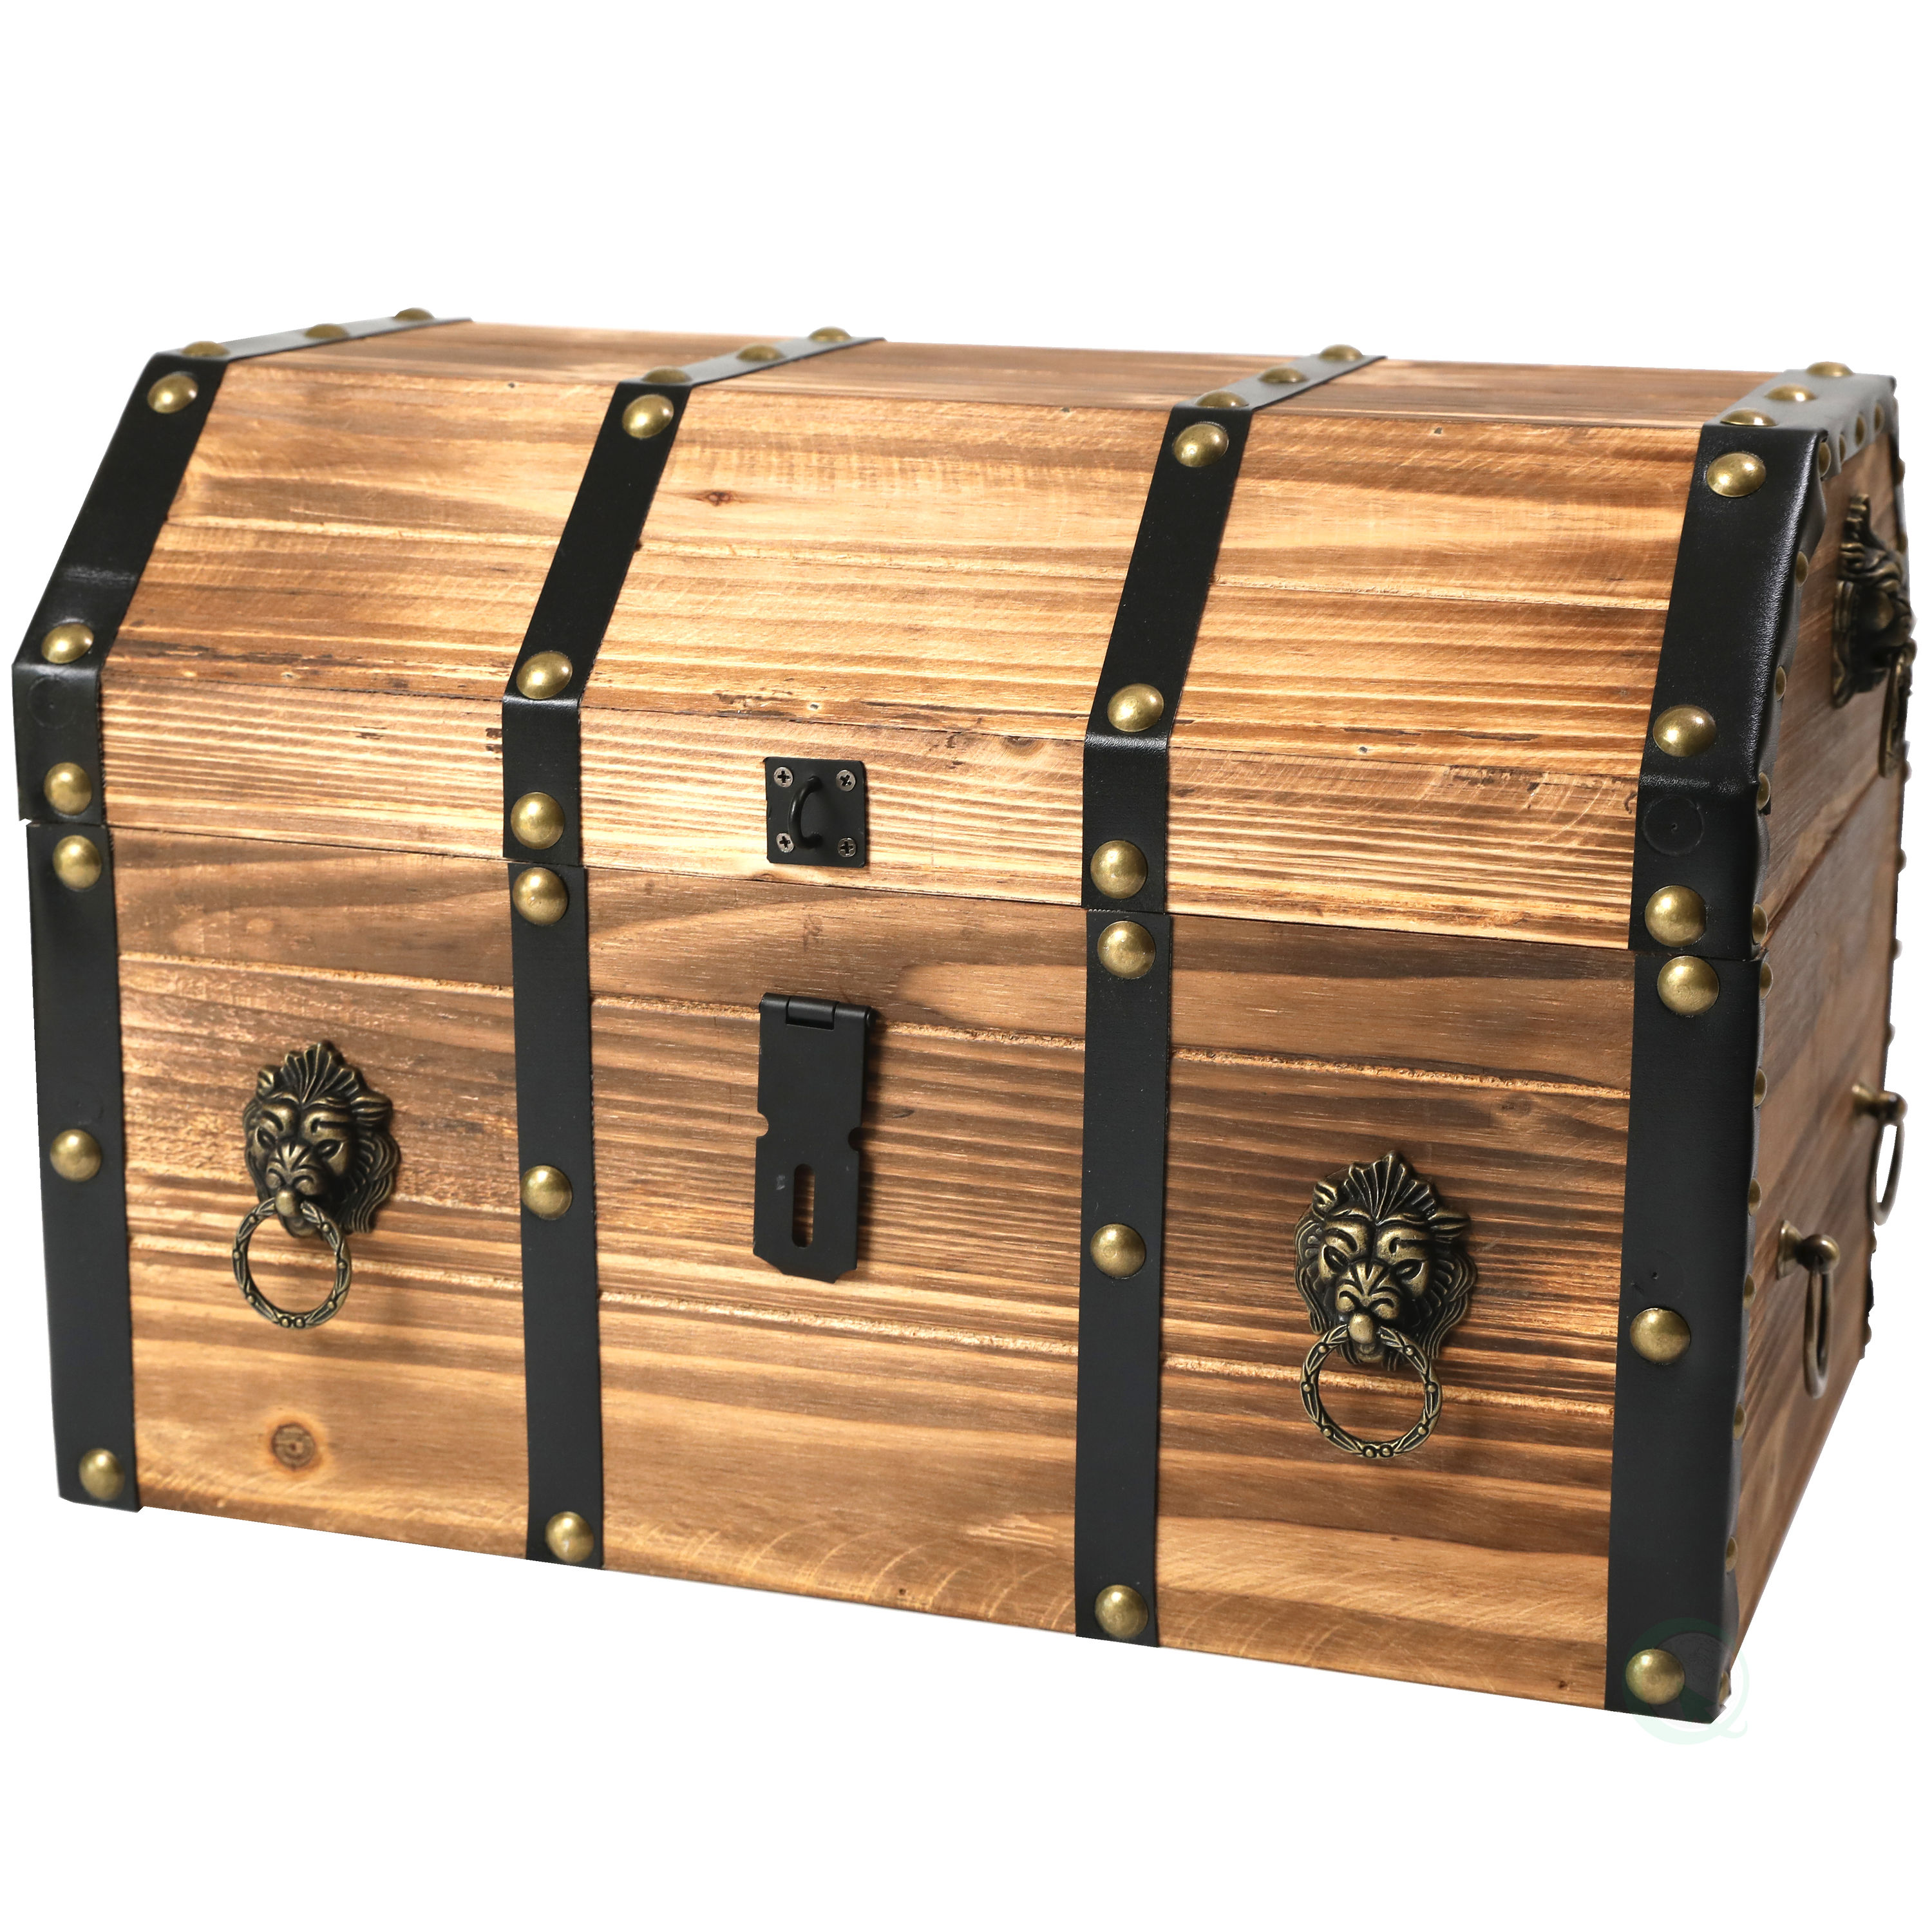 New Vintiquewise Cherry Wood with Fretwork Detail Vintage Trunk QI003426.L 